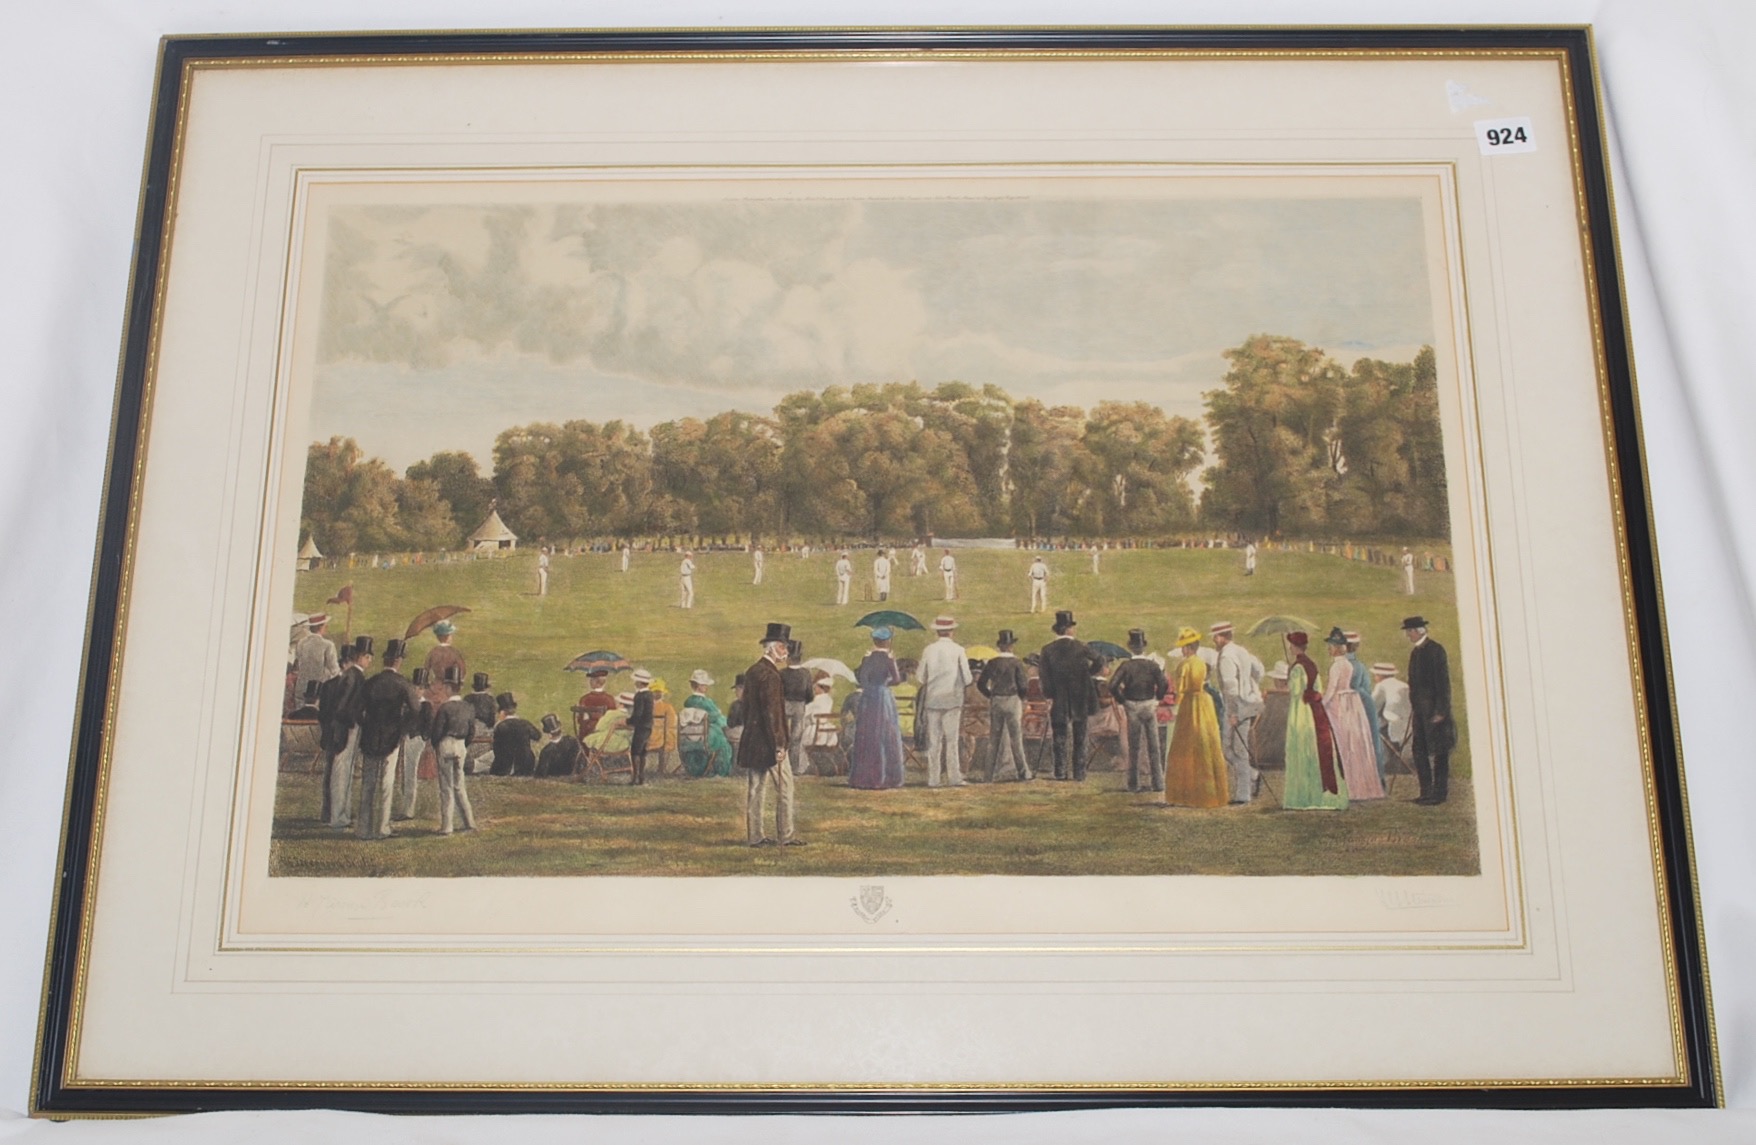 'Eton v Winchester'. Large hand colour etching, by F.G. Stevenson after H. Jamyn Brook, showing a